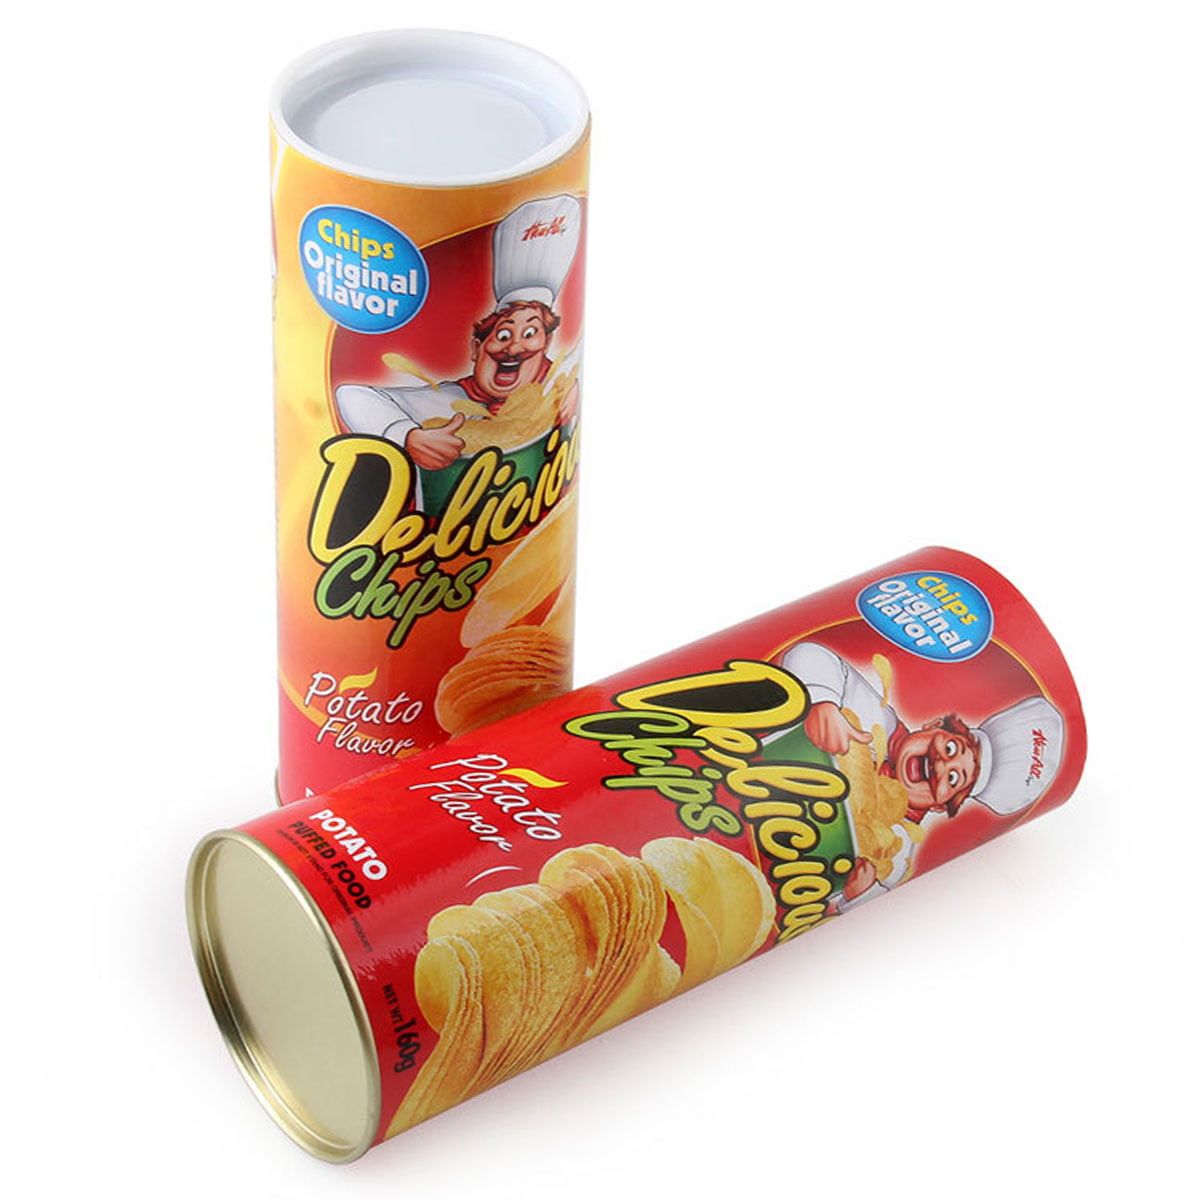 Scare G0B2 V4H5 Potato Chip Snake In A Can Gag Gift Prank Large Size Shock X5M0 